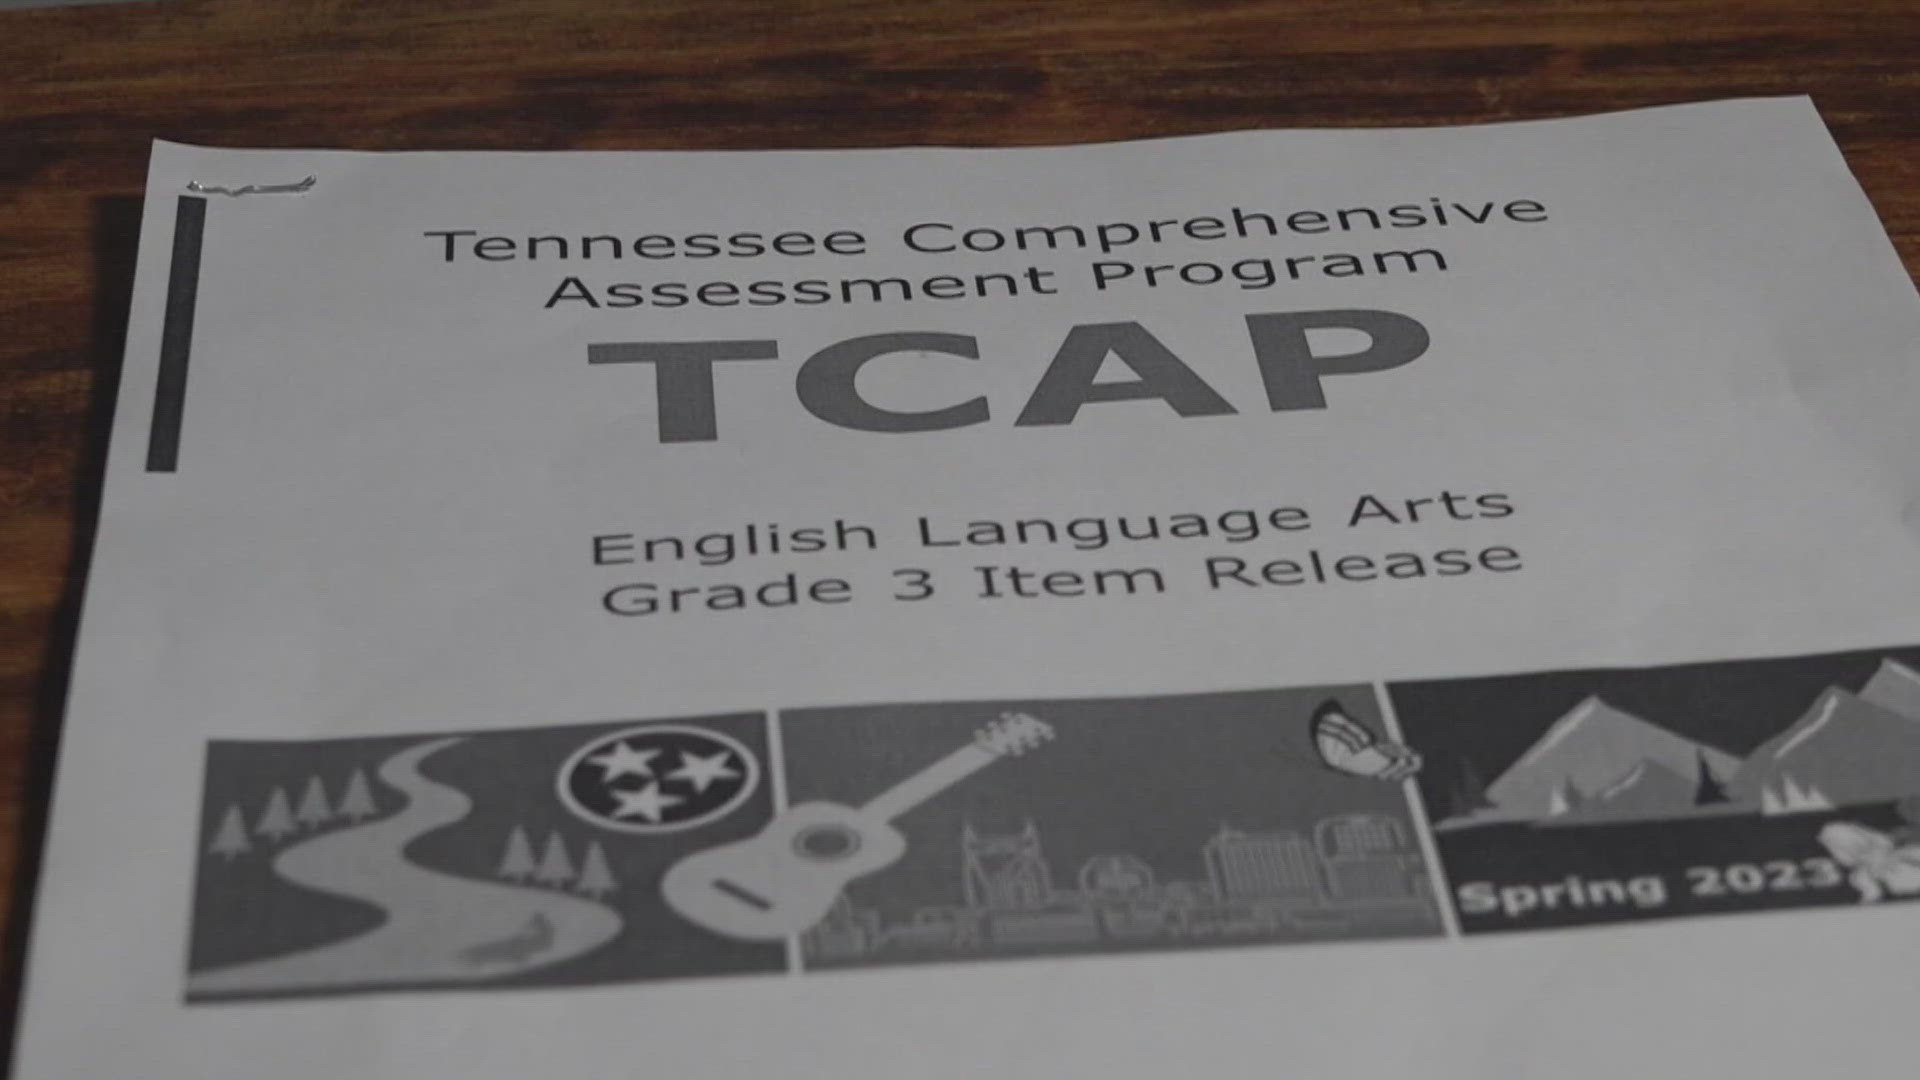 The East Tennessee Children's Hospital saw an almost 50% increase in emergency room visits last year during the TCAP testing period.